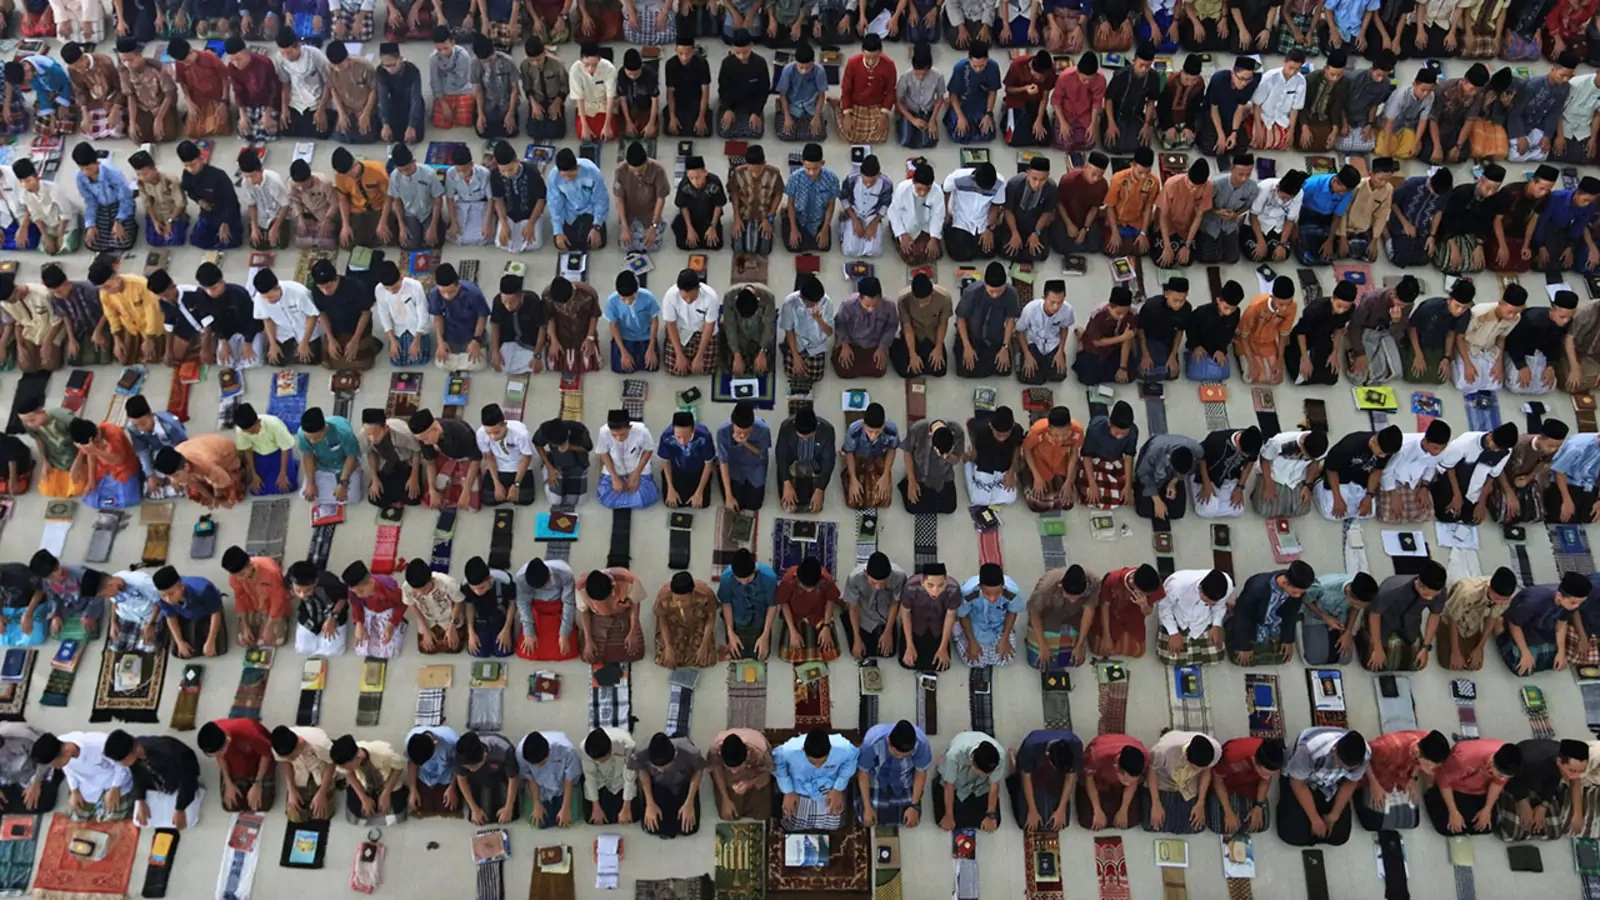 Students pray at an Islamic boarding school in Indonesia.